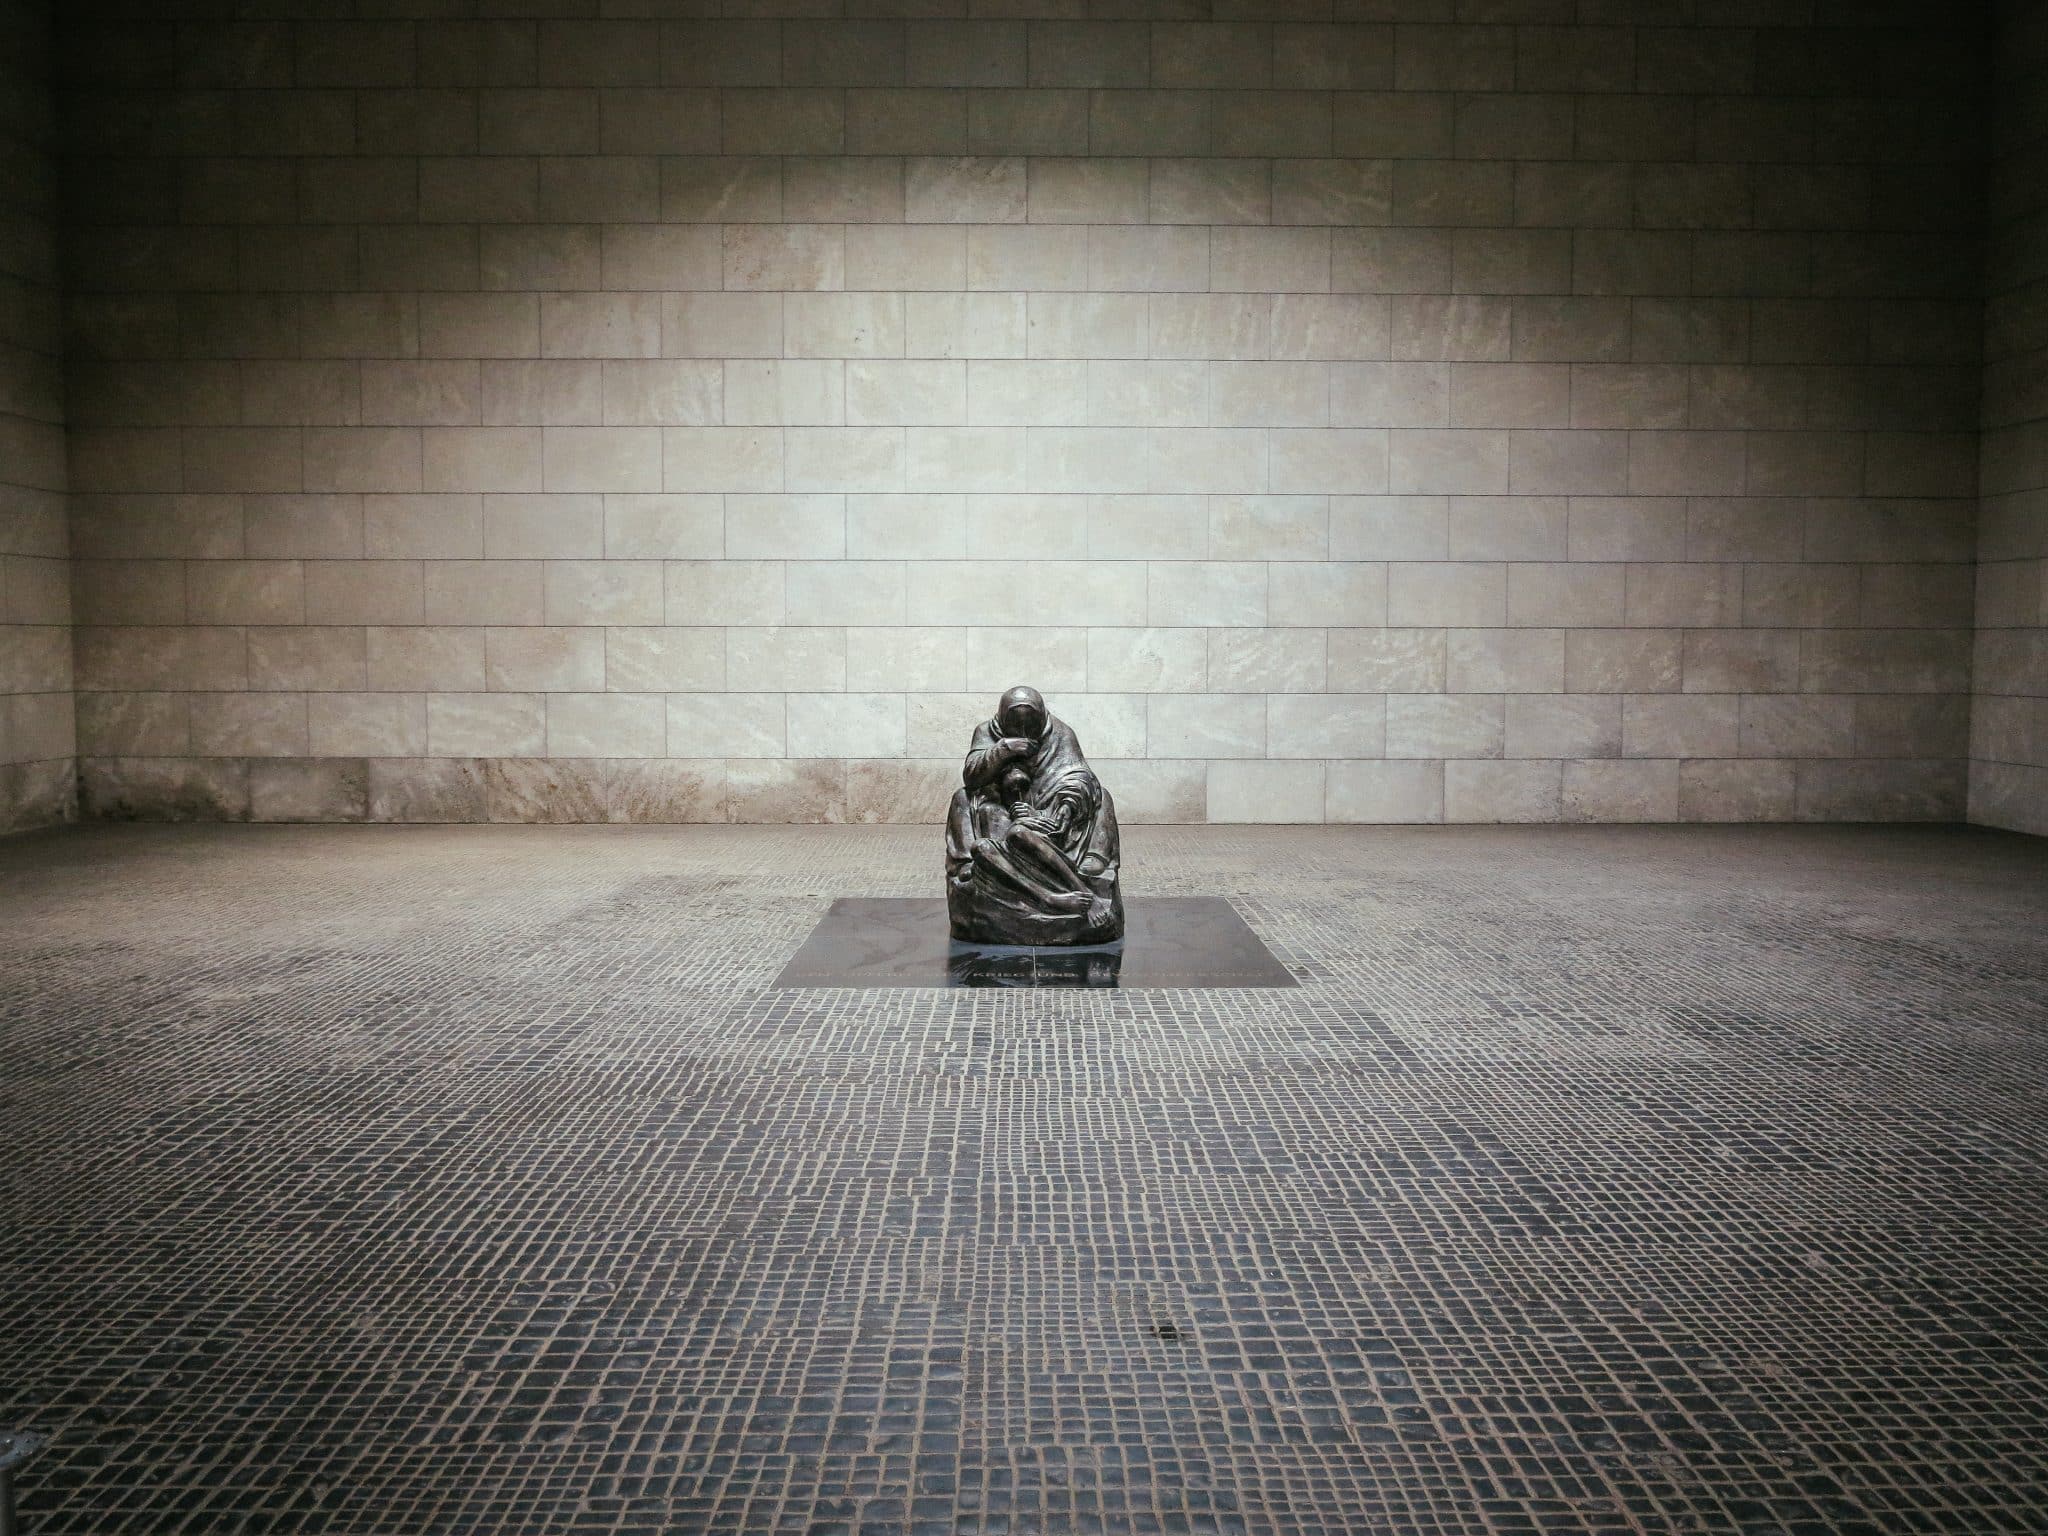 Neue Wache In Berin - Memorial To The Victims Of War And Tyranny